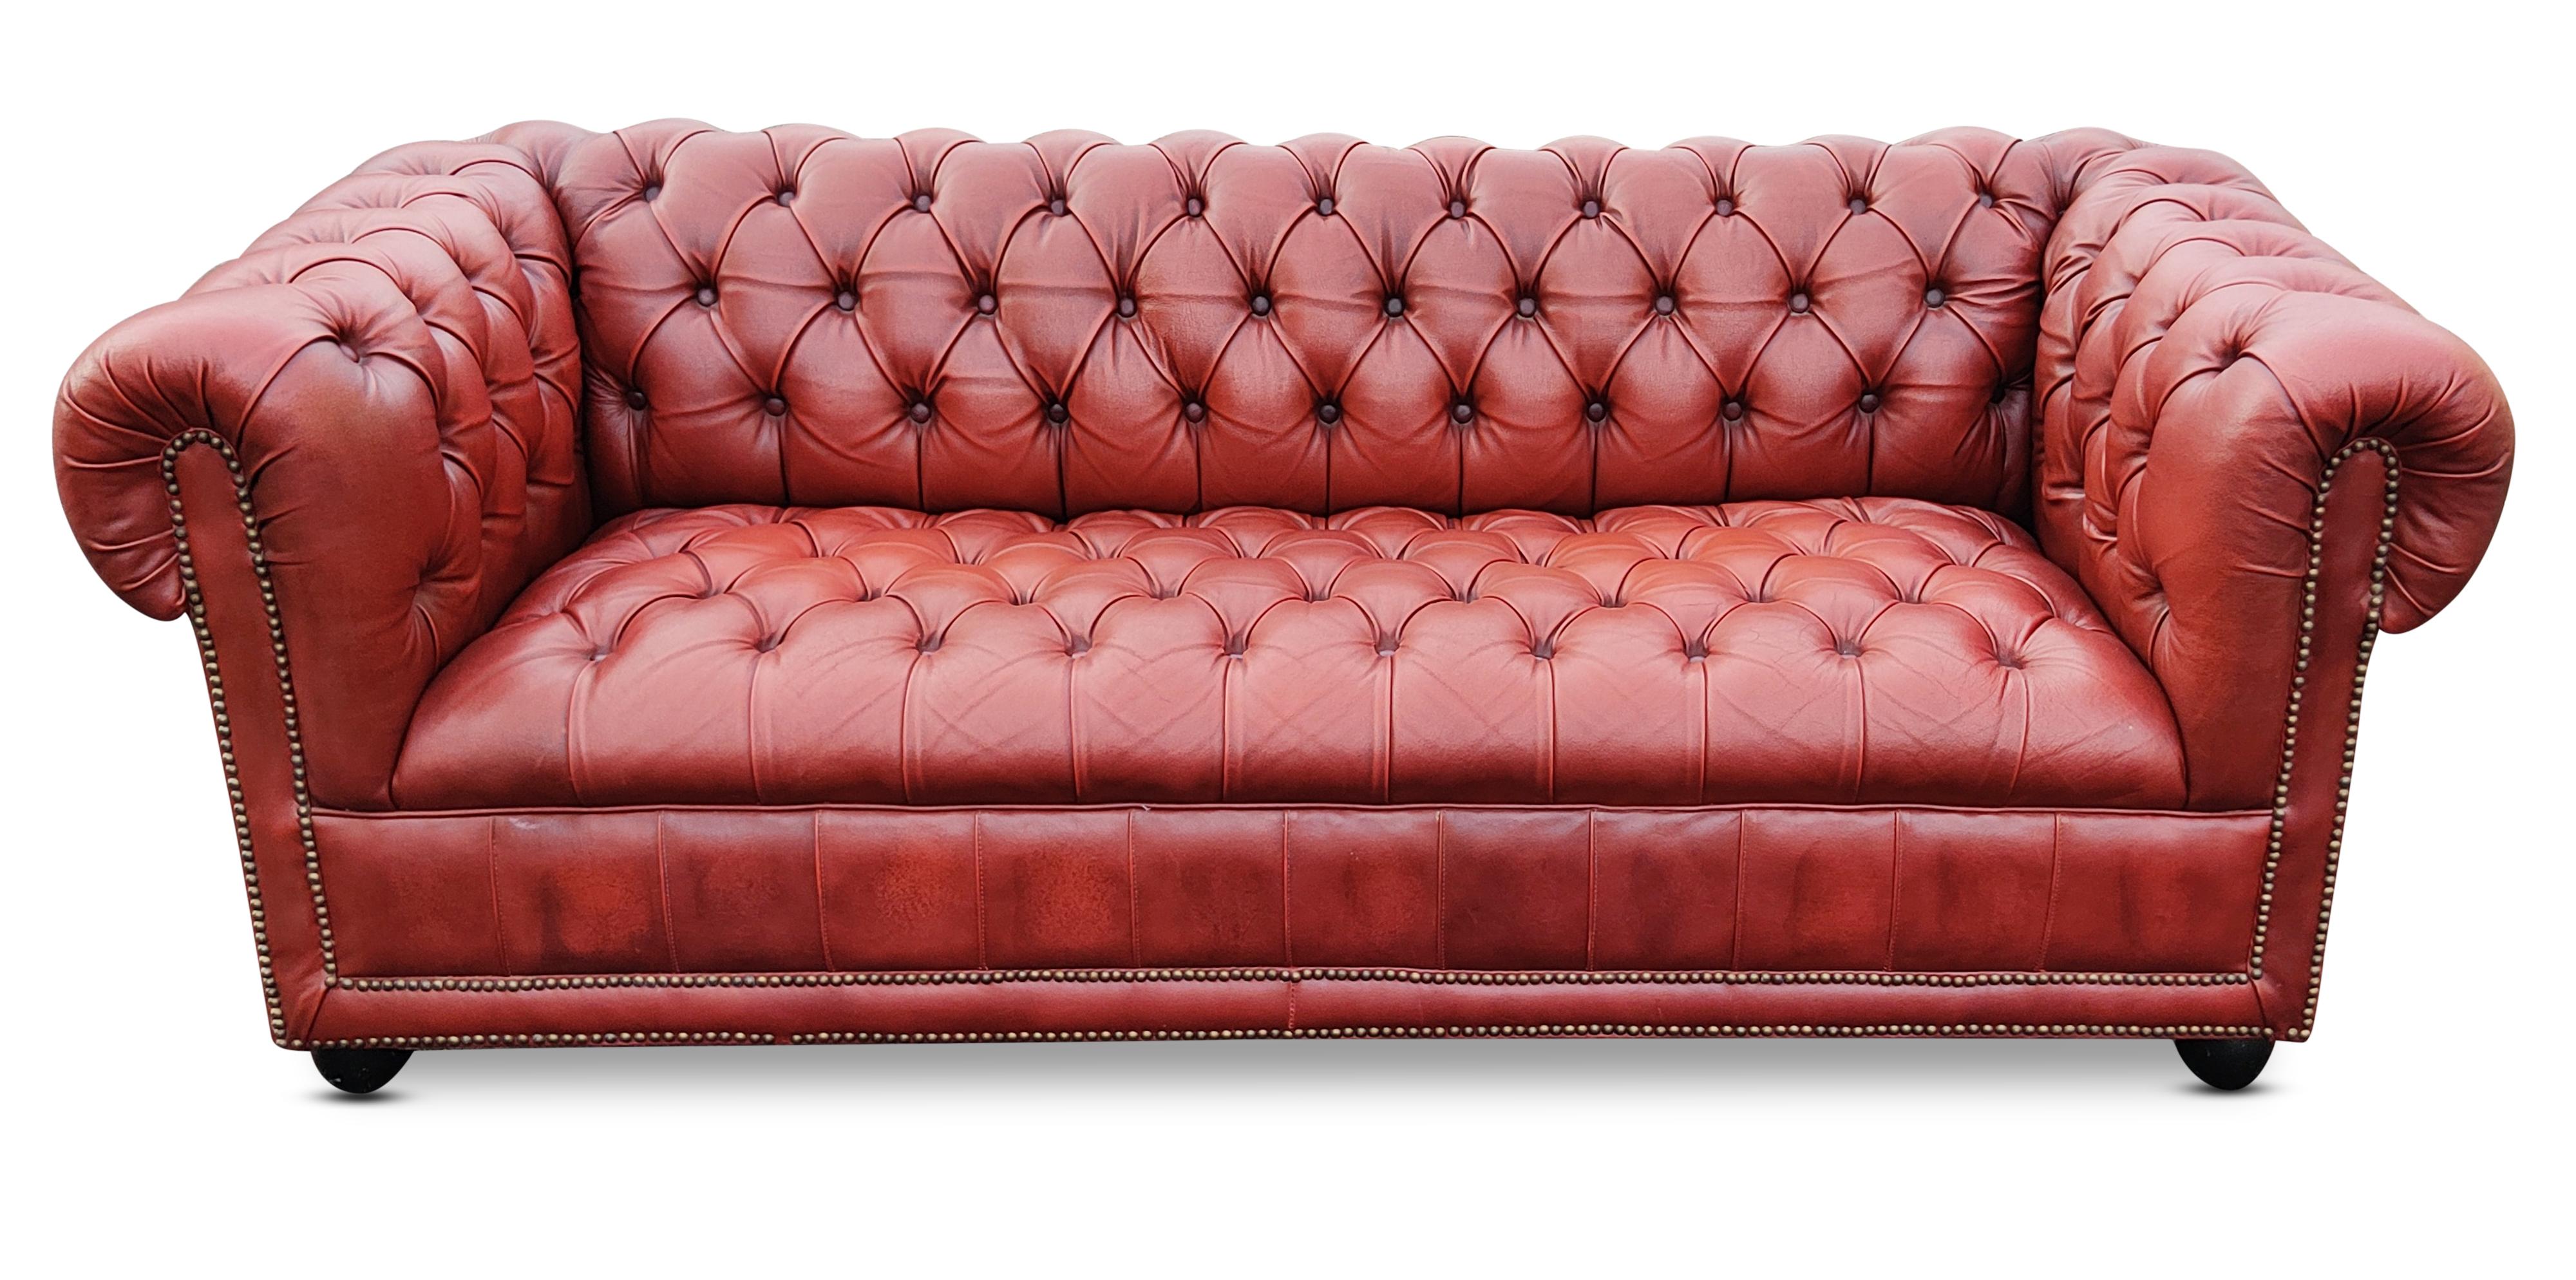 Hand-Crafted English Chesterfield Cardovian Oxblood Tufted Leather Sofa